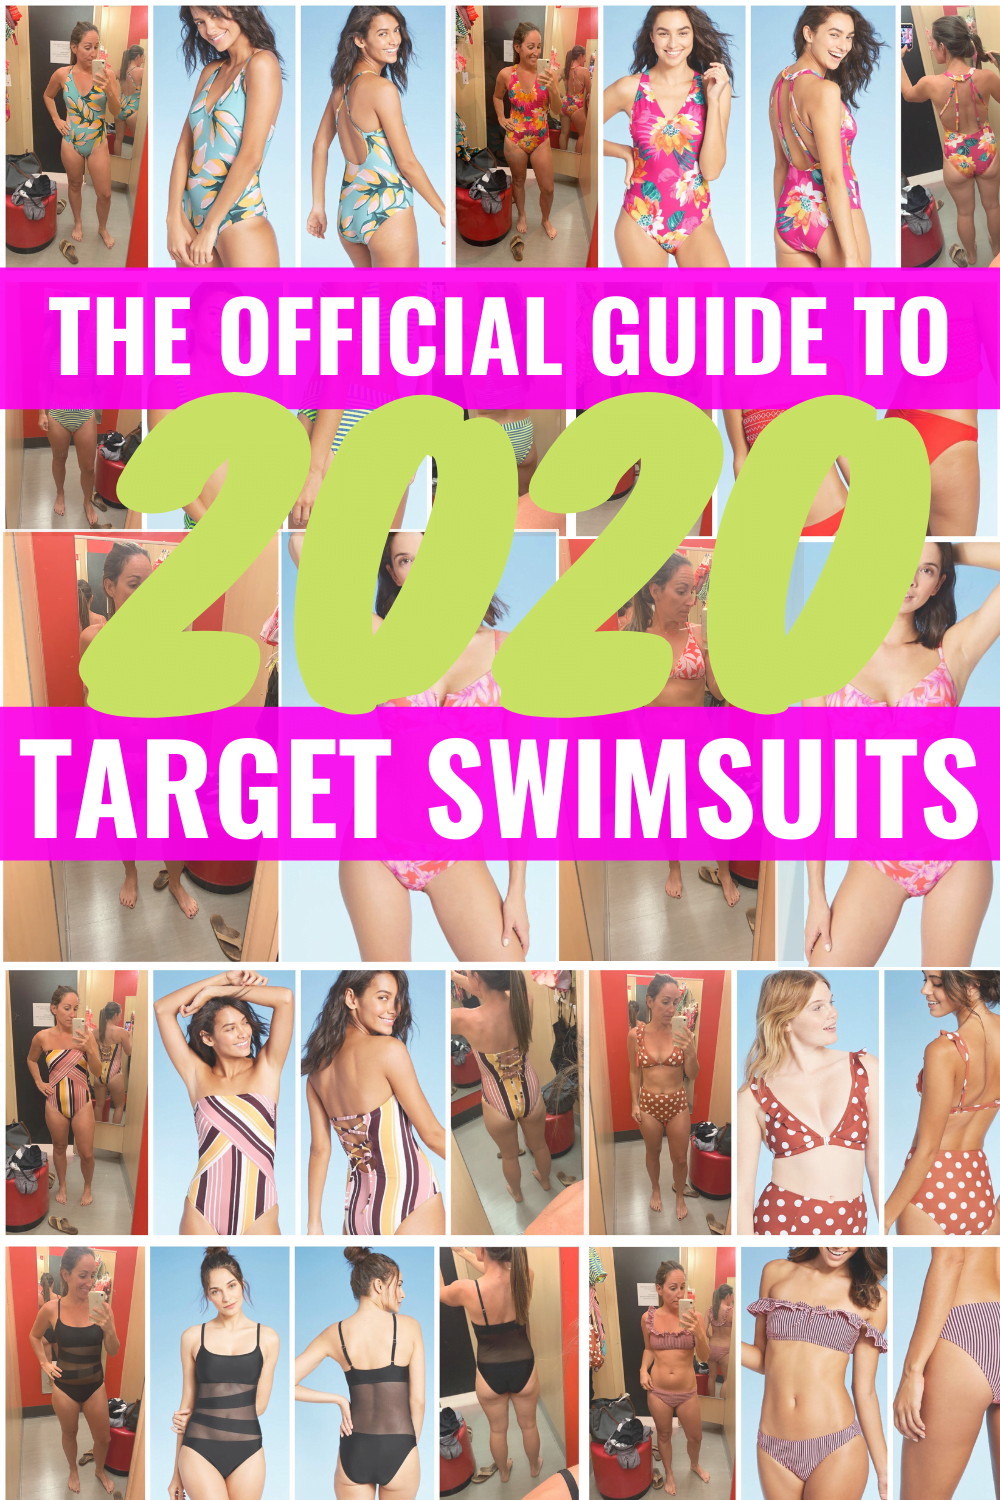 THE OFFICIAL GUIDE TO TARGET SWIMWEAR 2020 - My official dressing room try-on of Target swimsuits featuring sizing information, style details and more! | Target Bikinis - Target One Piece - Target Swimsuits - Target Swimsuits Women - One Piece Swimsuit Target - Target Women’s Swimsuits - Cute Bathing Suits At Target